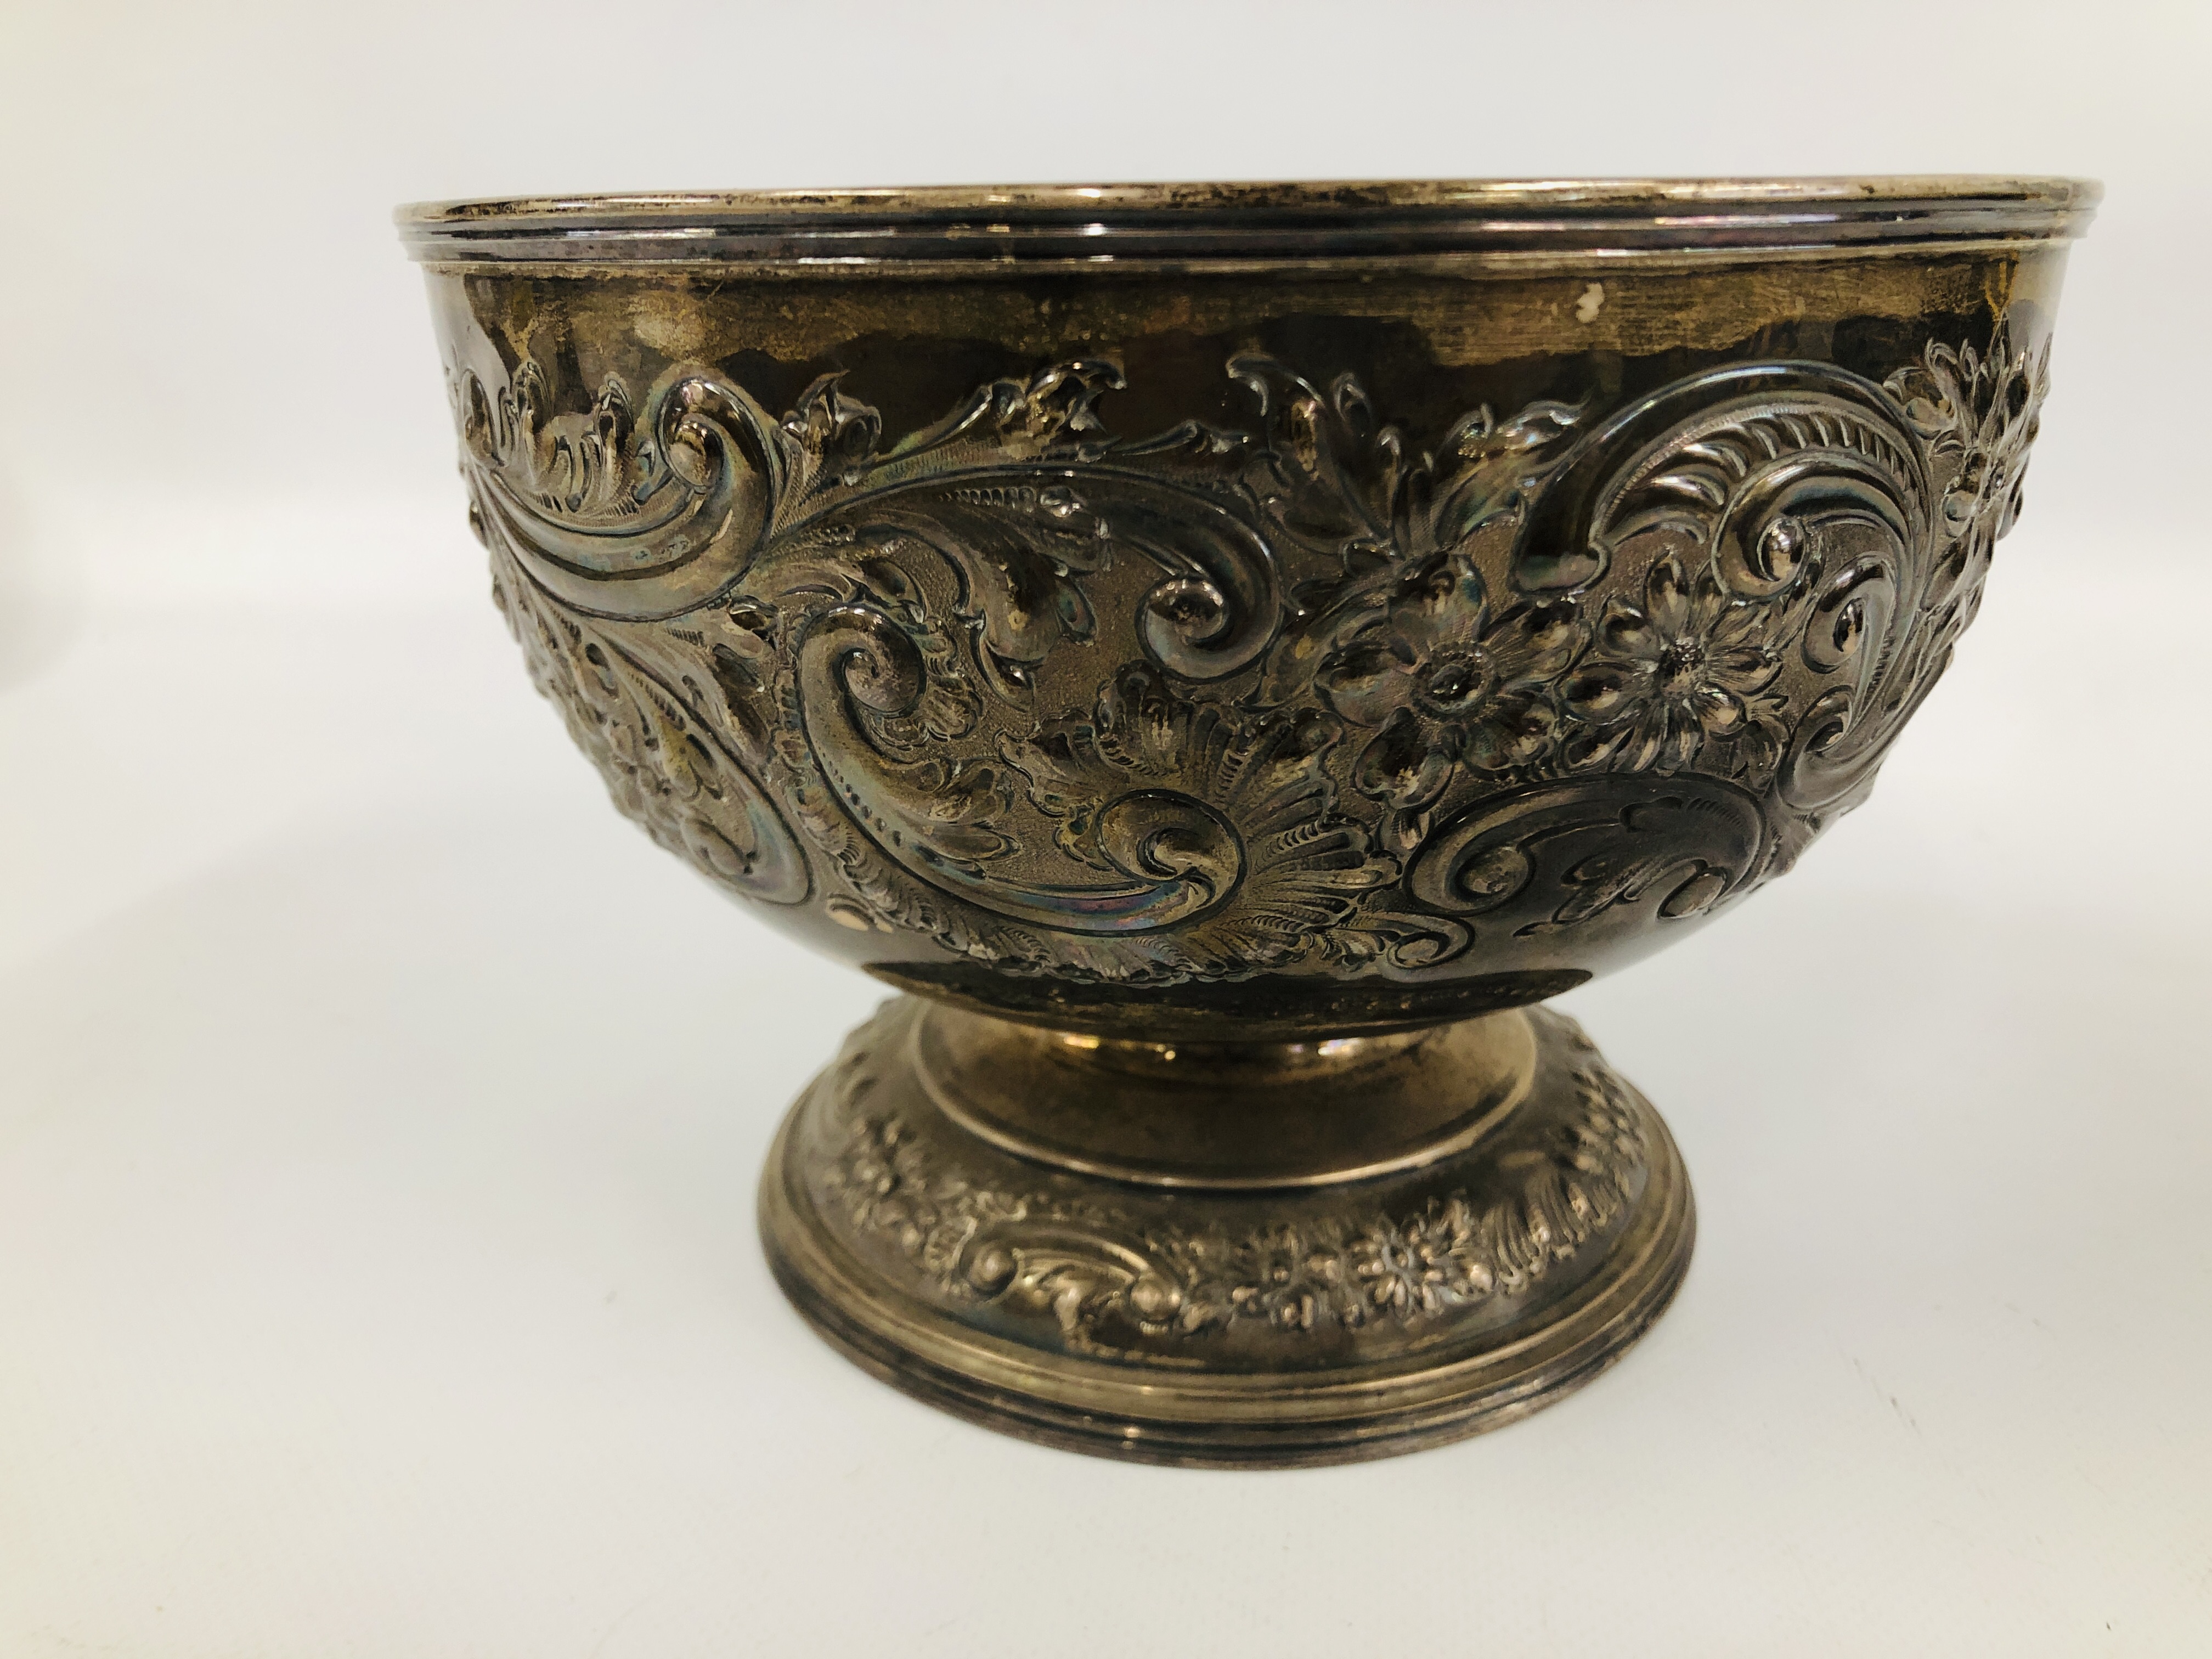 FOOTED CIRCULAR SILVER ROSE BOWL THE BODY WITH SCROLL AND FLOWER DECORATION SHEFFIELD 1912 WIDTH - Image 6 of 9